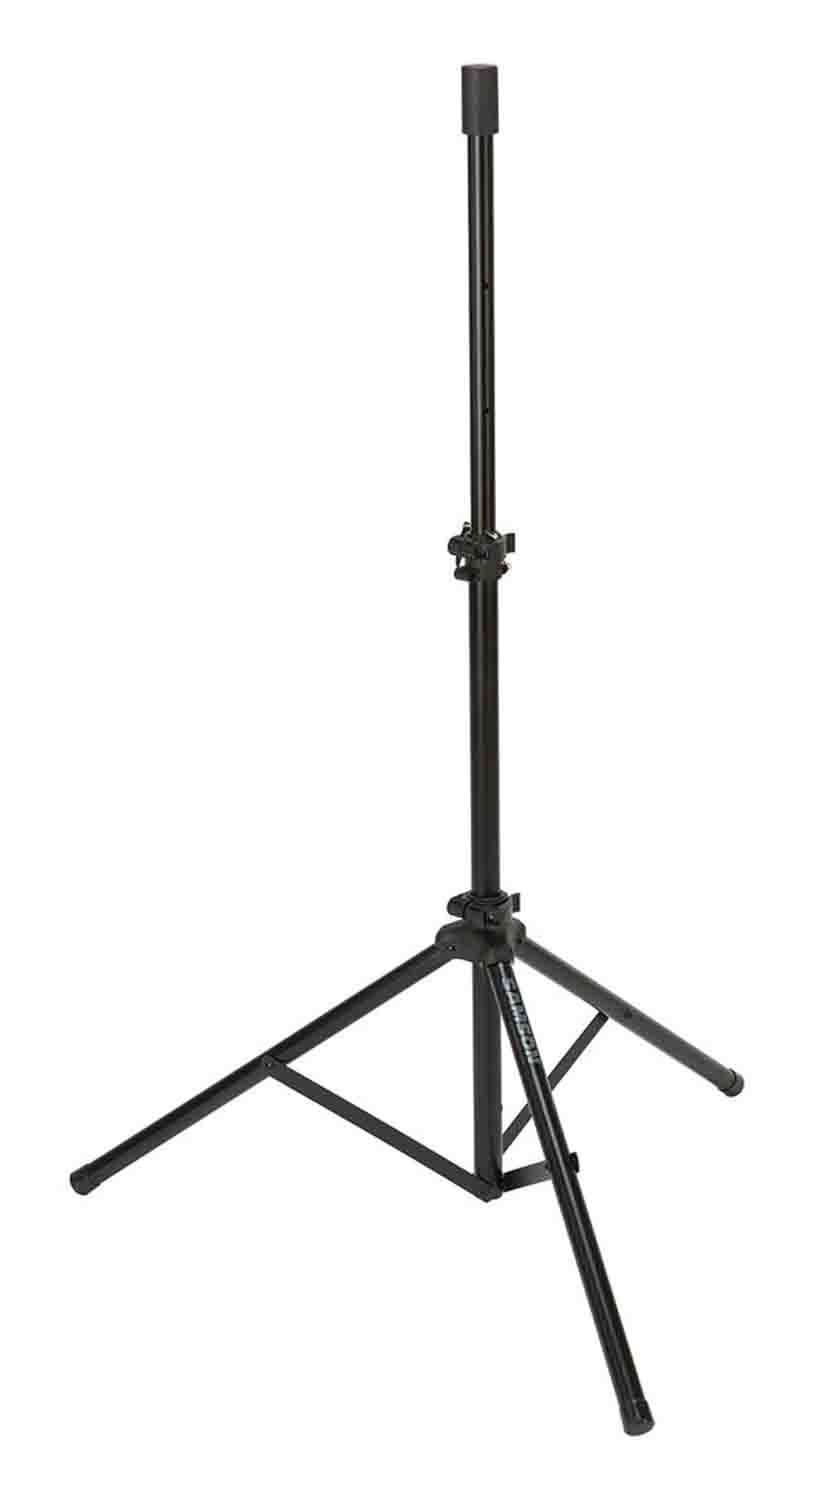 Samson SALS40 Lightweight Speaker Stand for Expedition Portable PAs - Single - Hollywood DJ